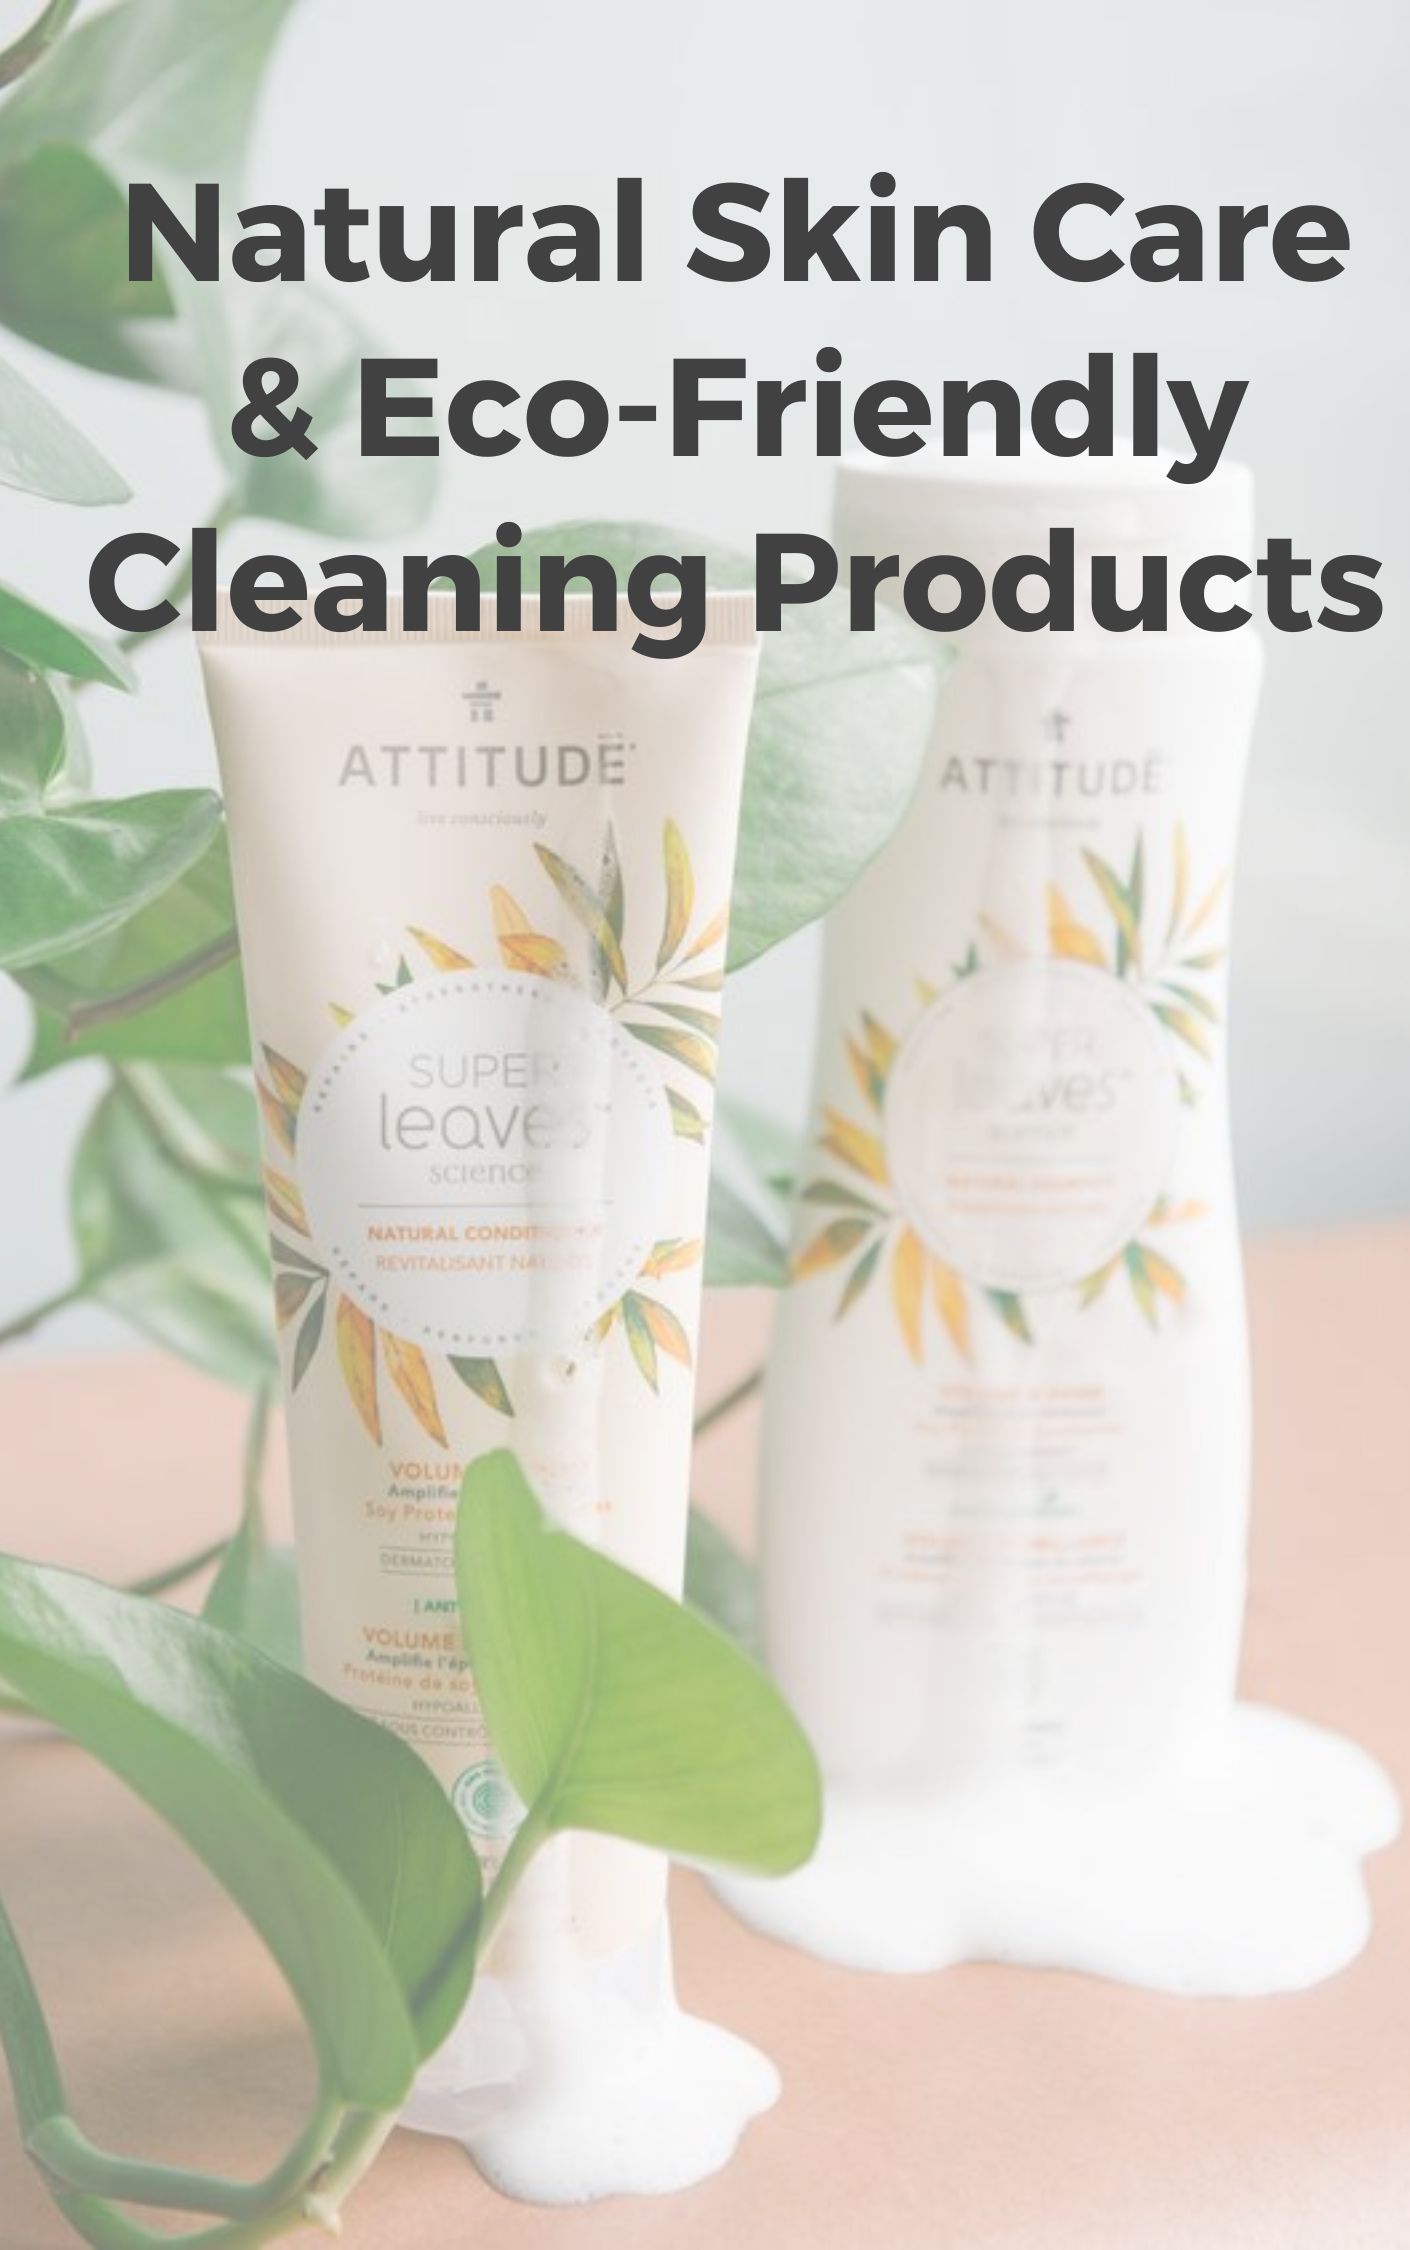 Two bottles of Attitude products which are commended for natural skin care and eco-friendly cleaning products